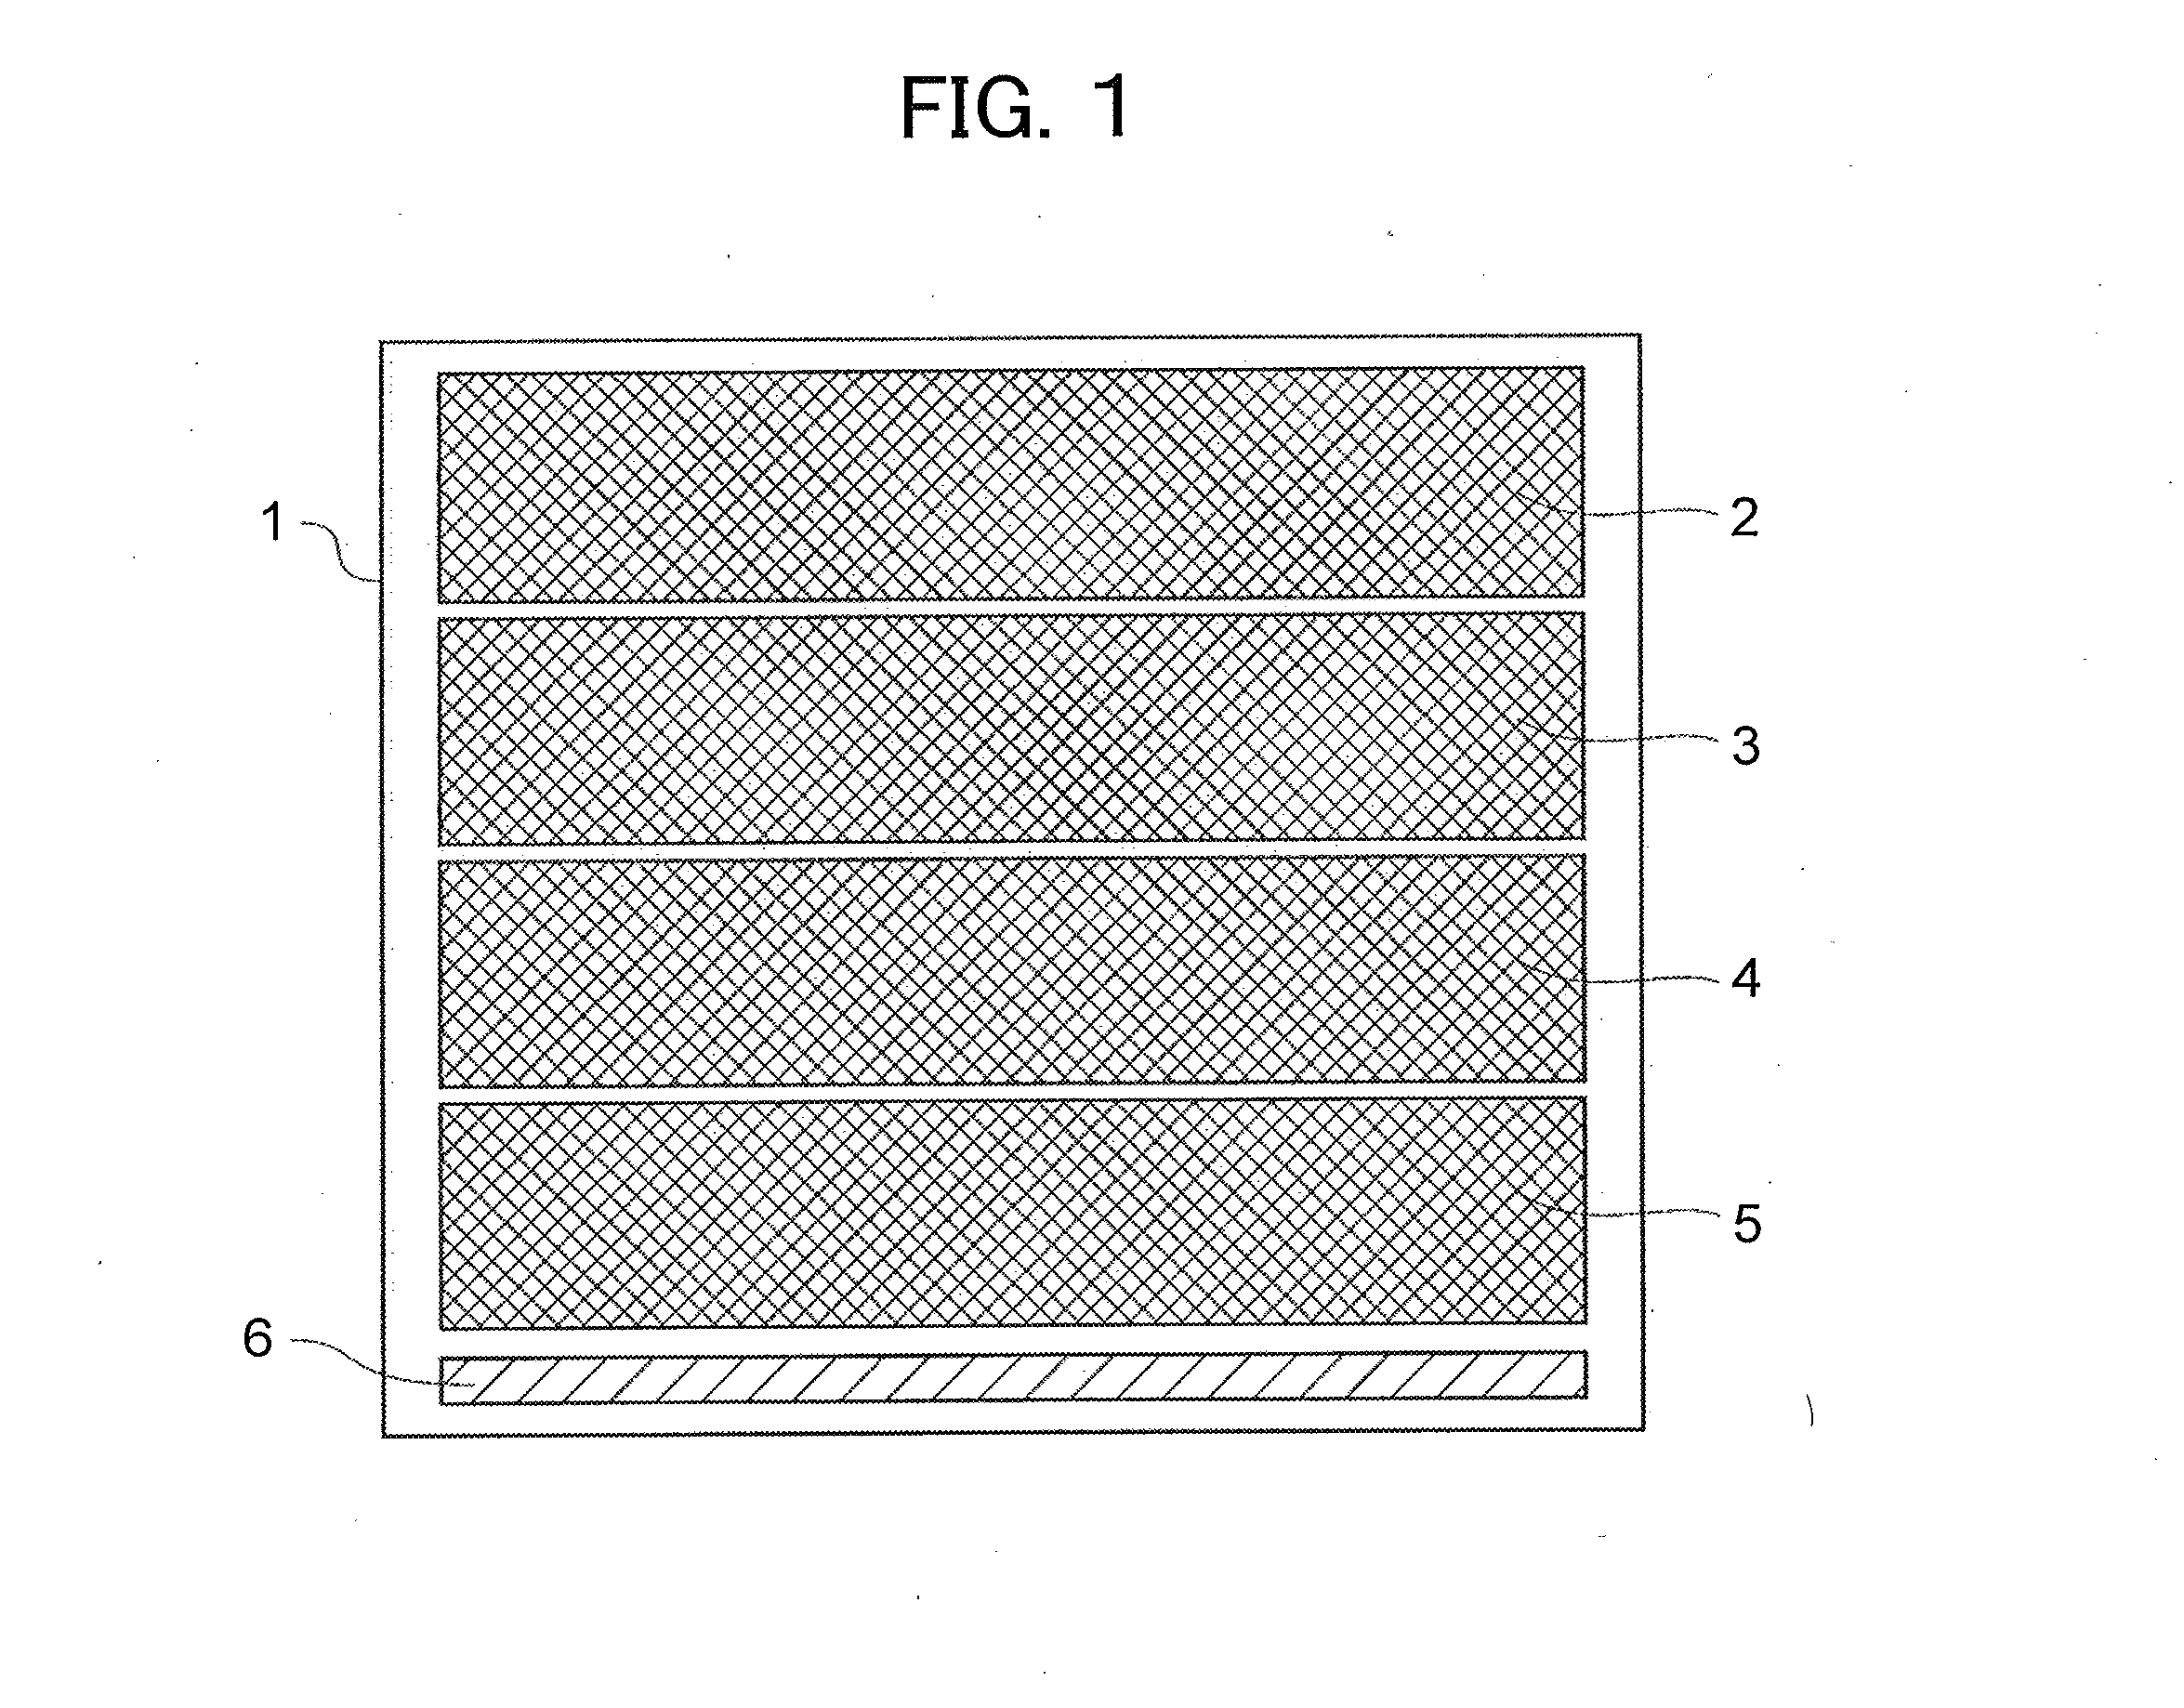 Cooling system for electronic device